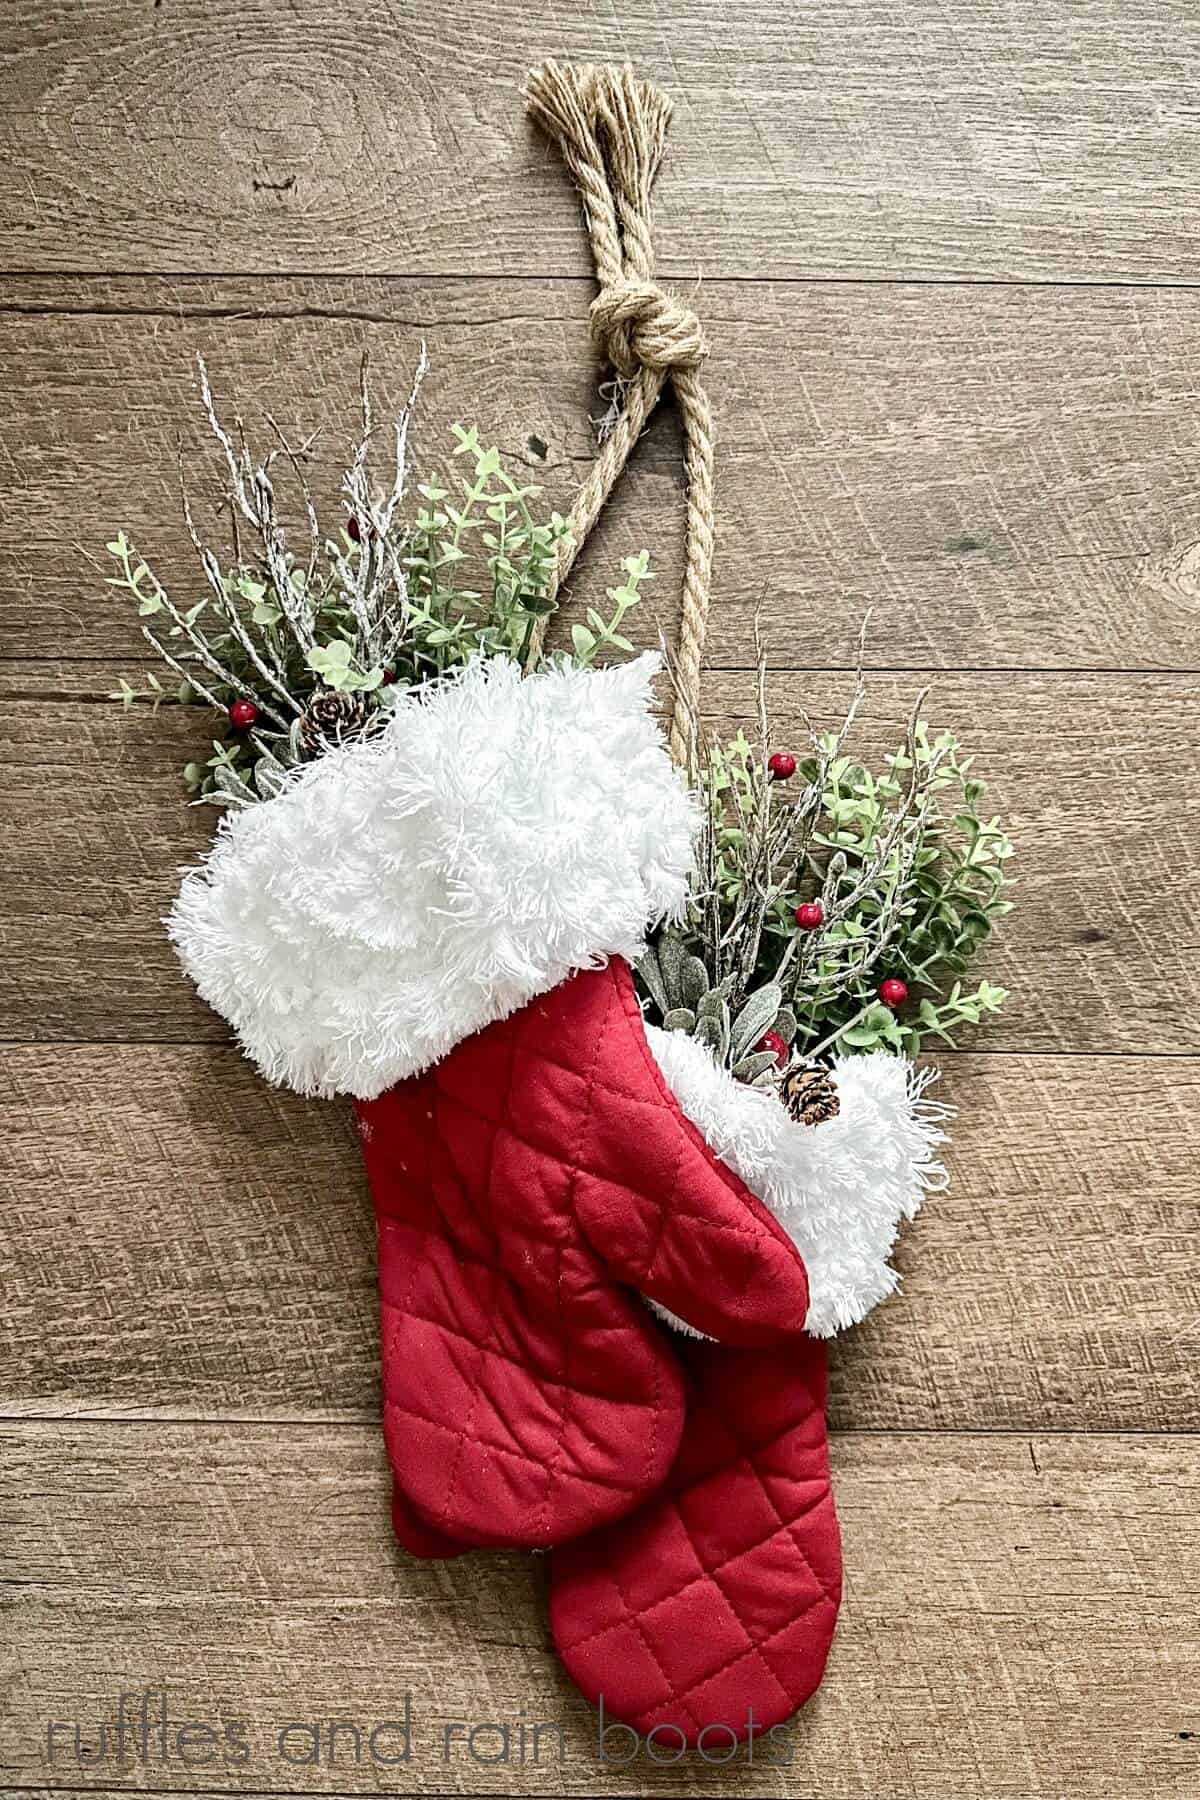 A pair of oven mitts made into Santa mittens with holiday greenery hanging on a wooden surface.